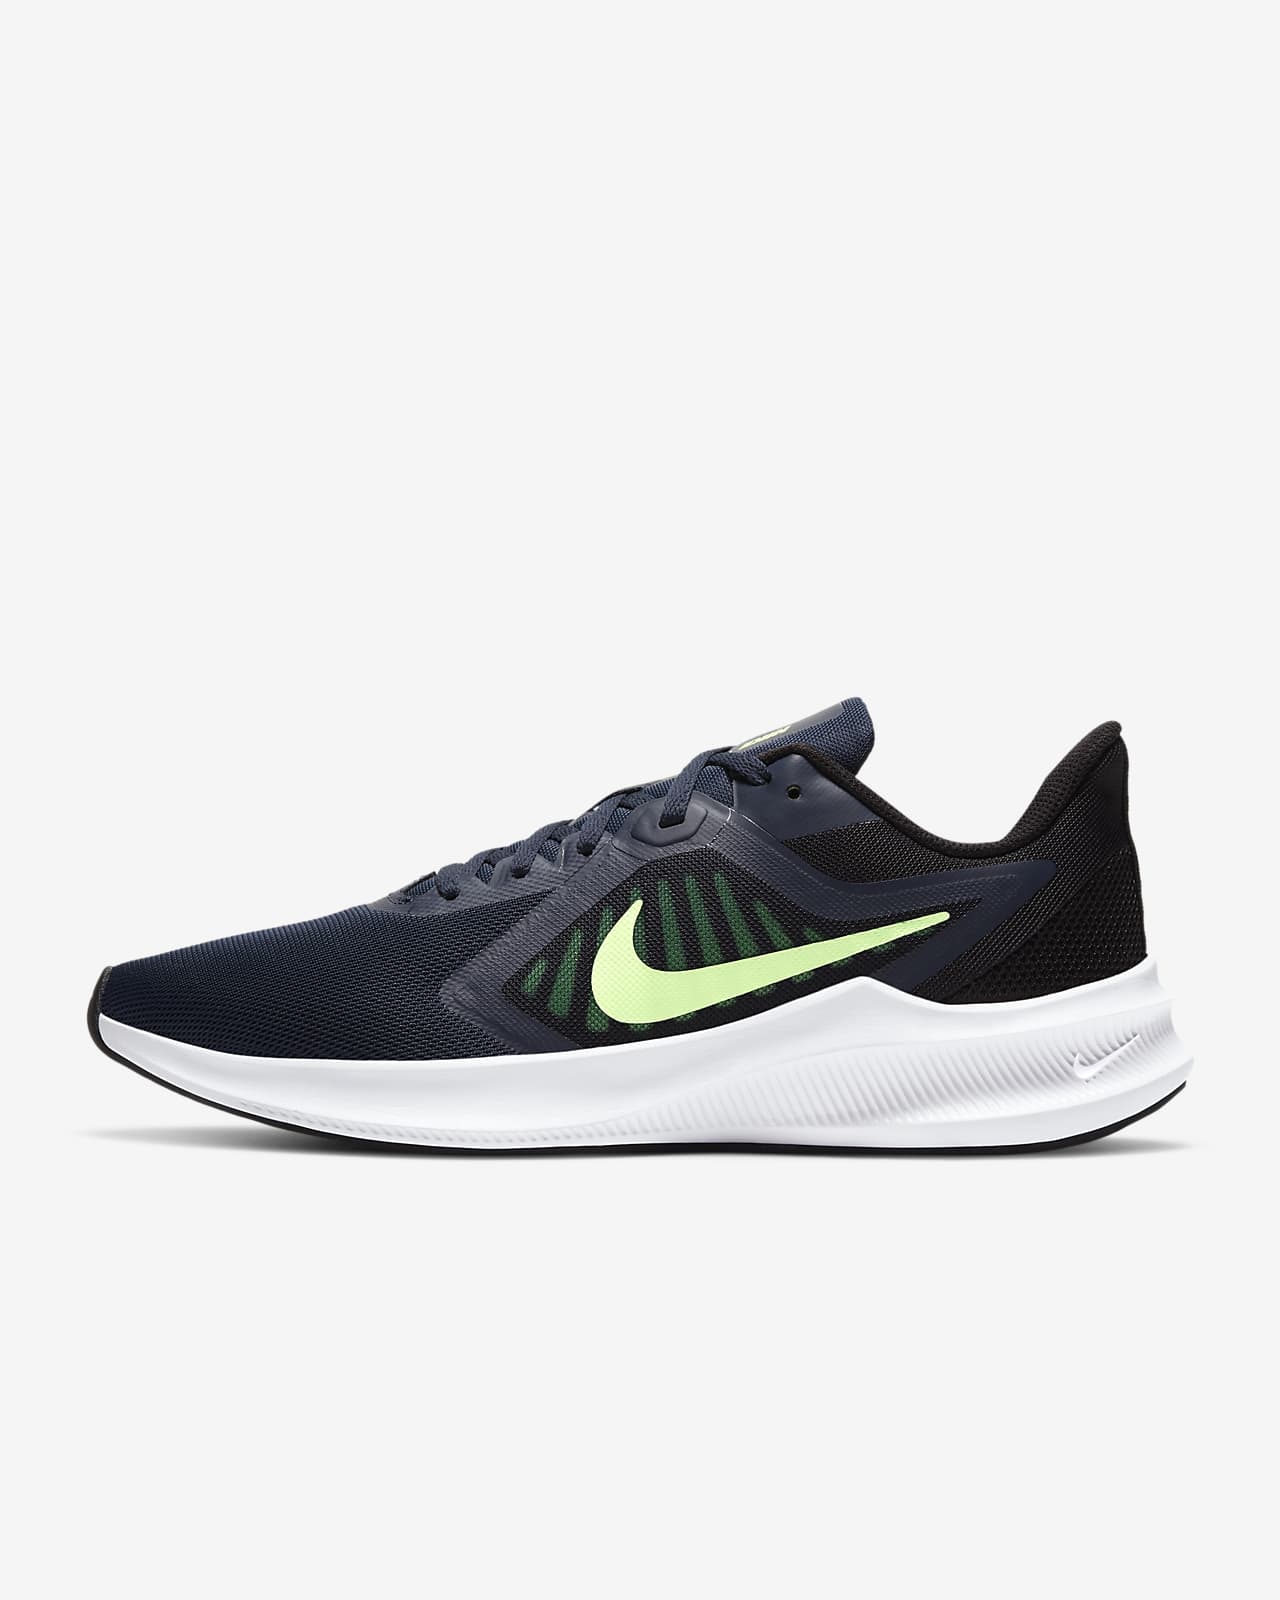 nike downshifter 10 men's running shoes stores